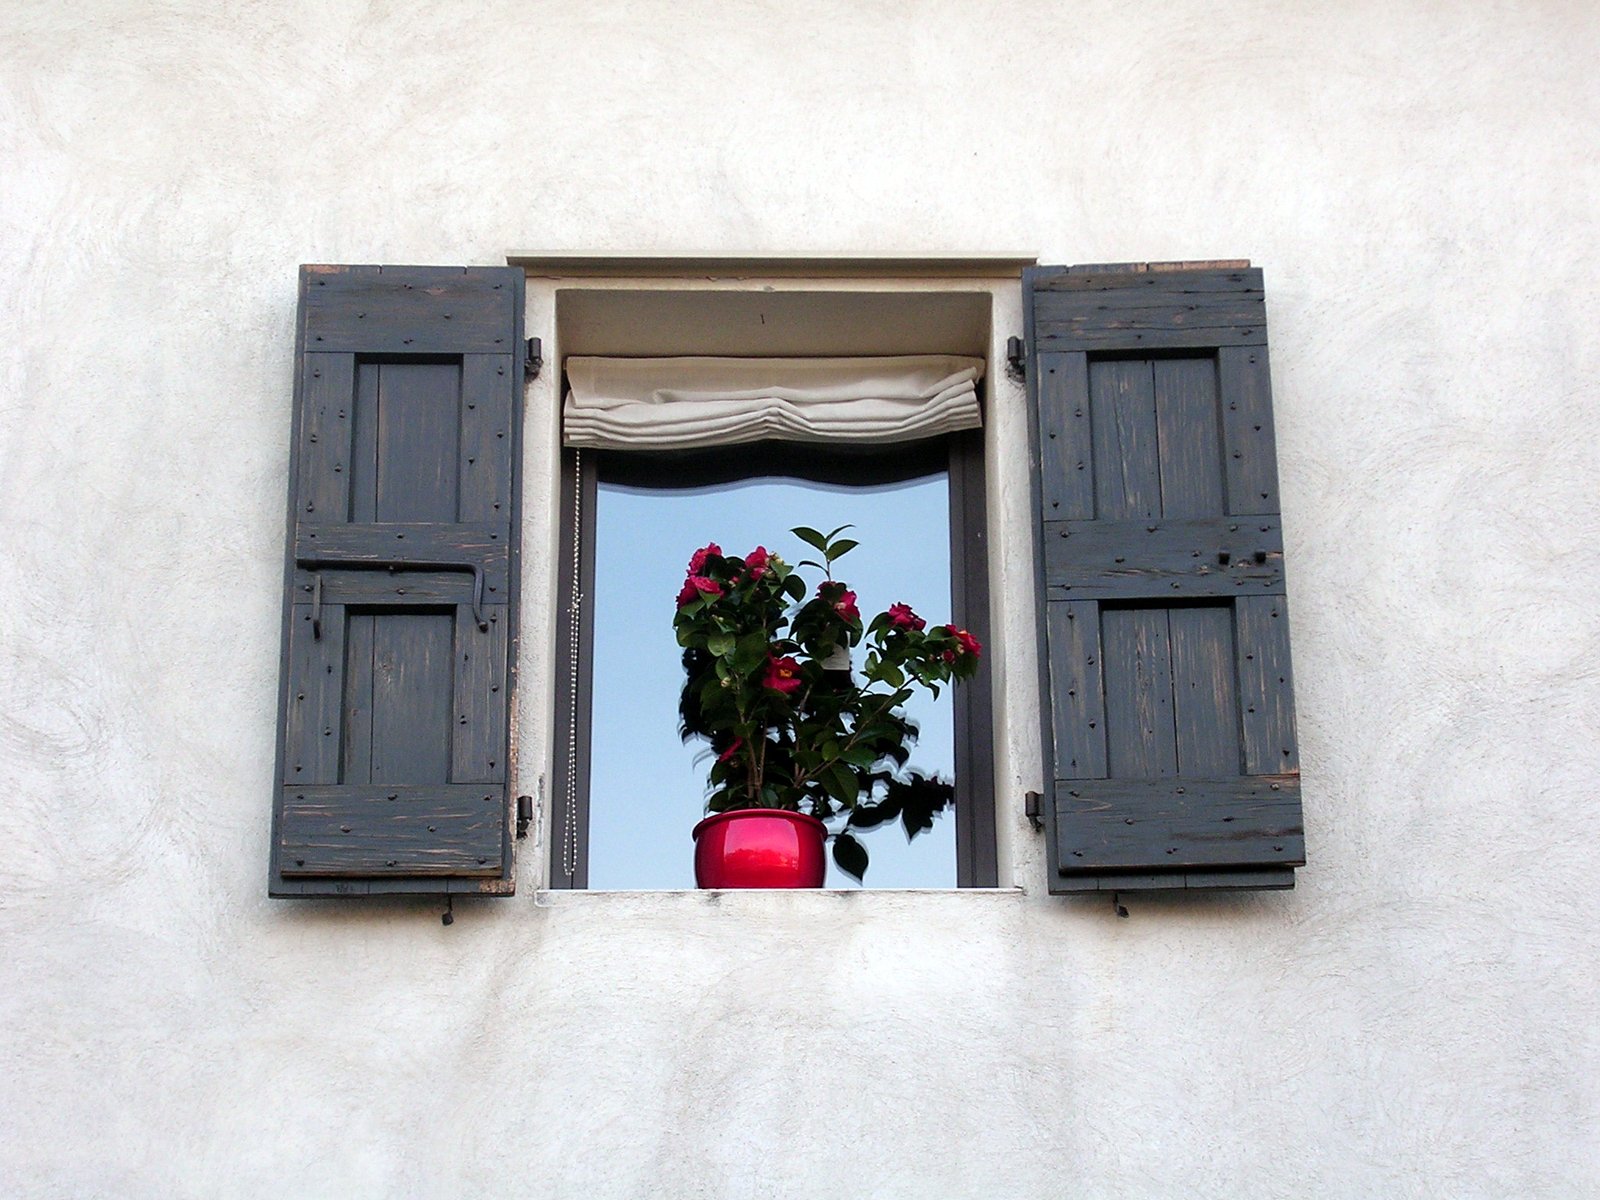 potted plant in red vase, seen from window of building